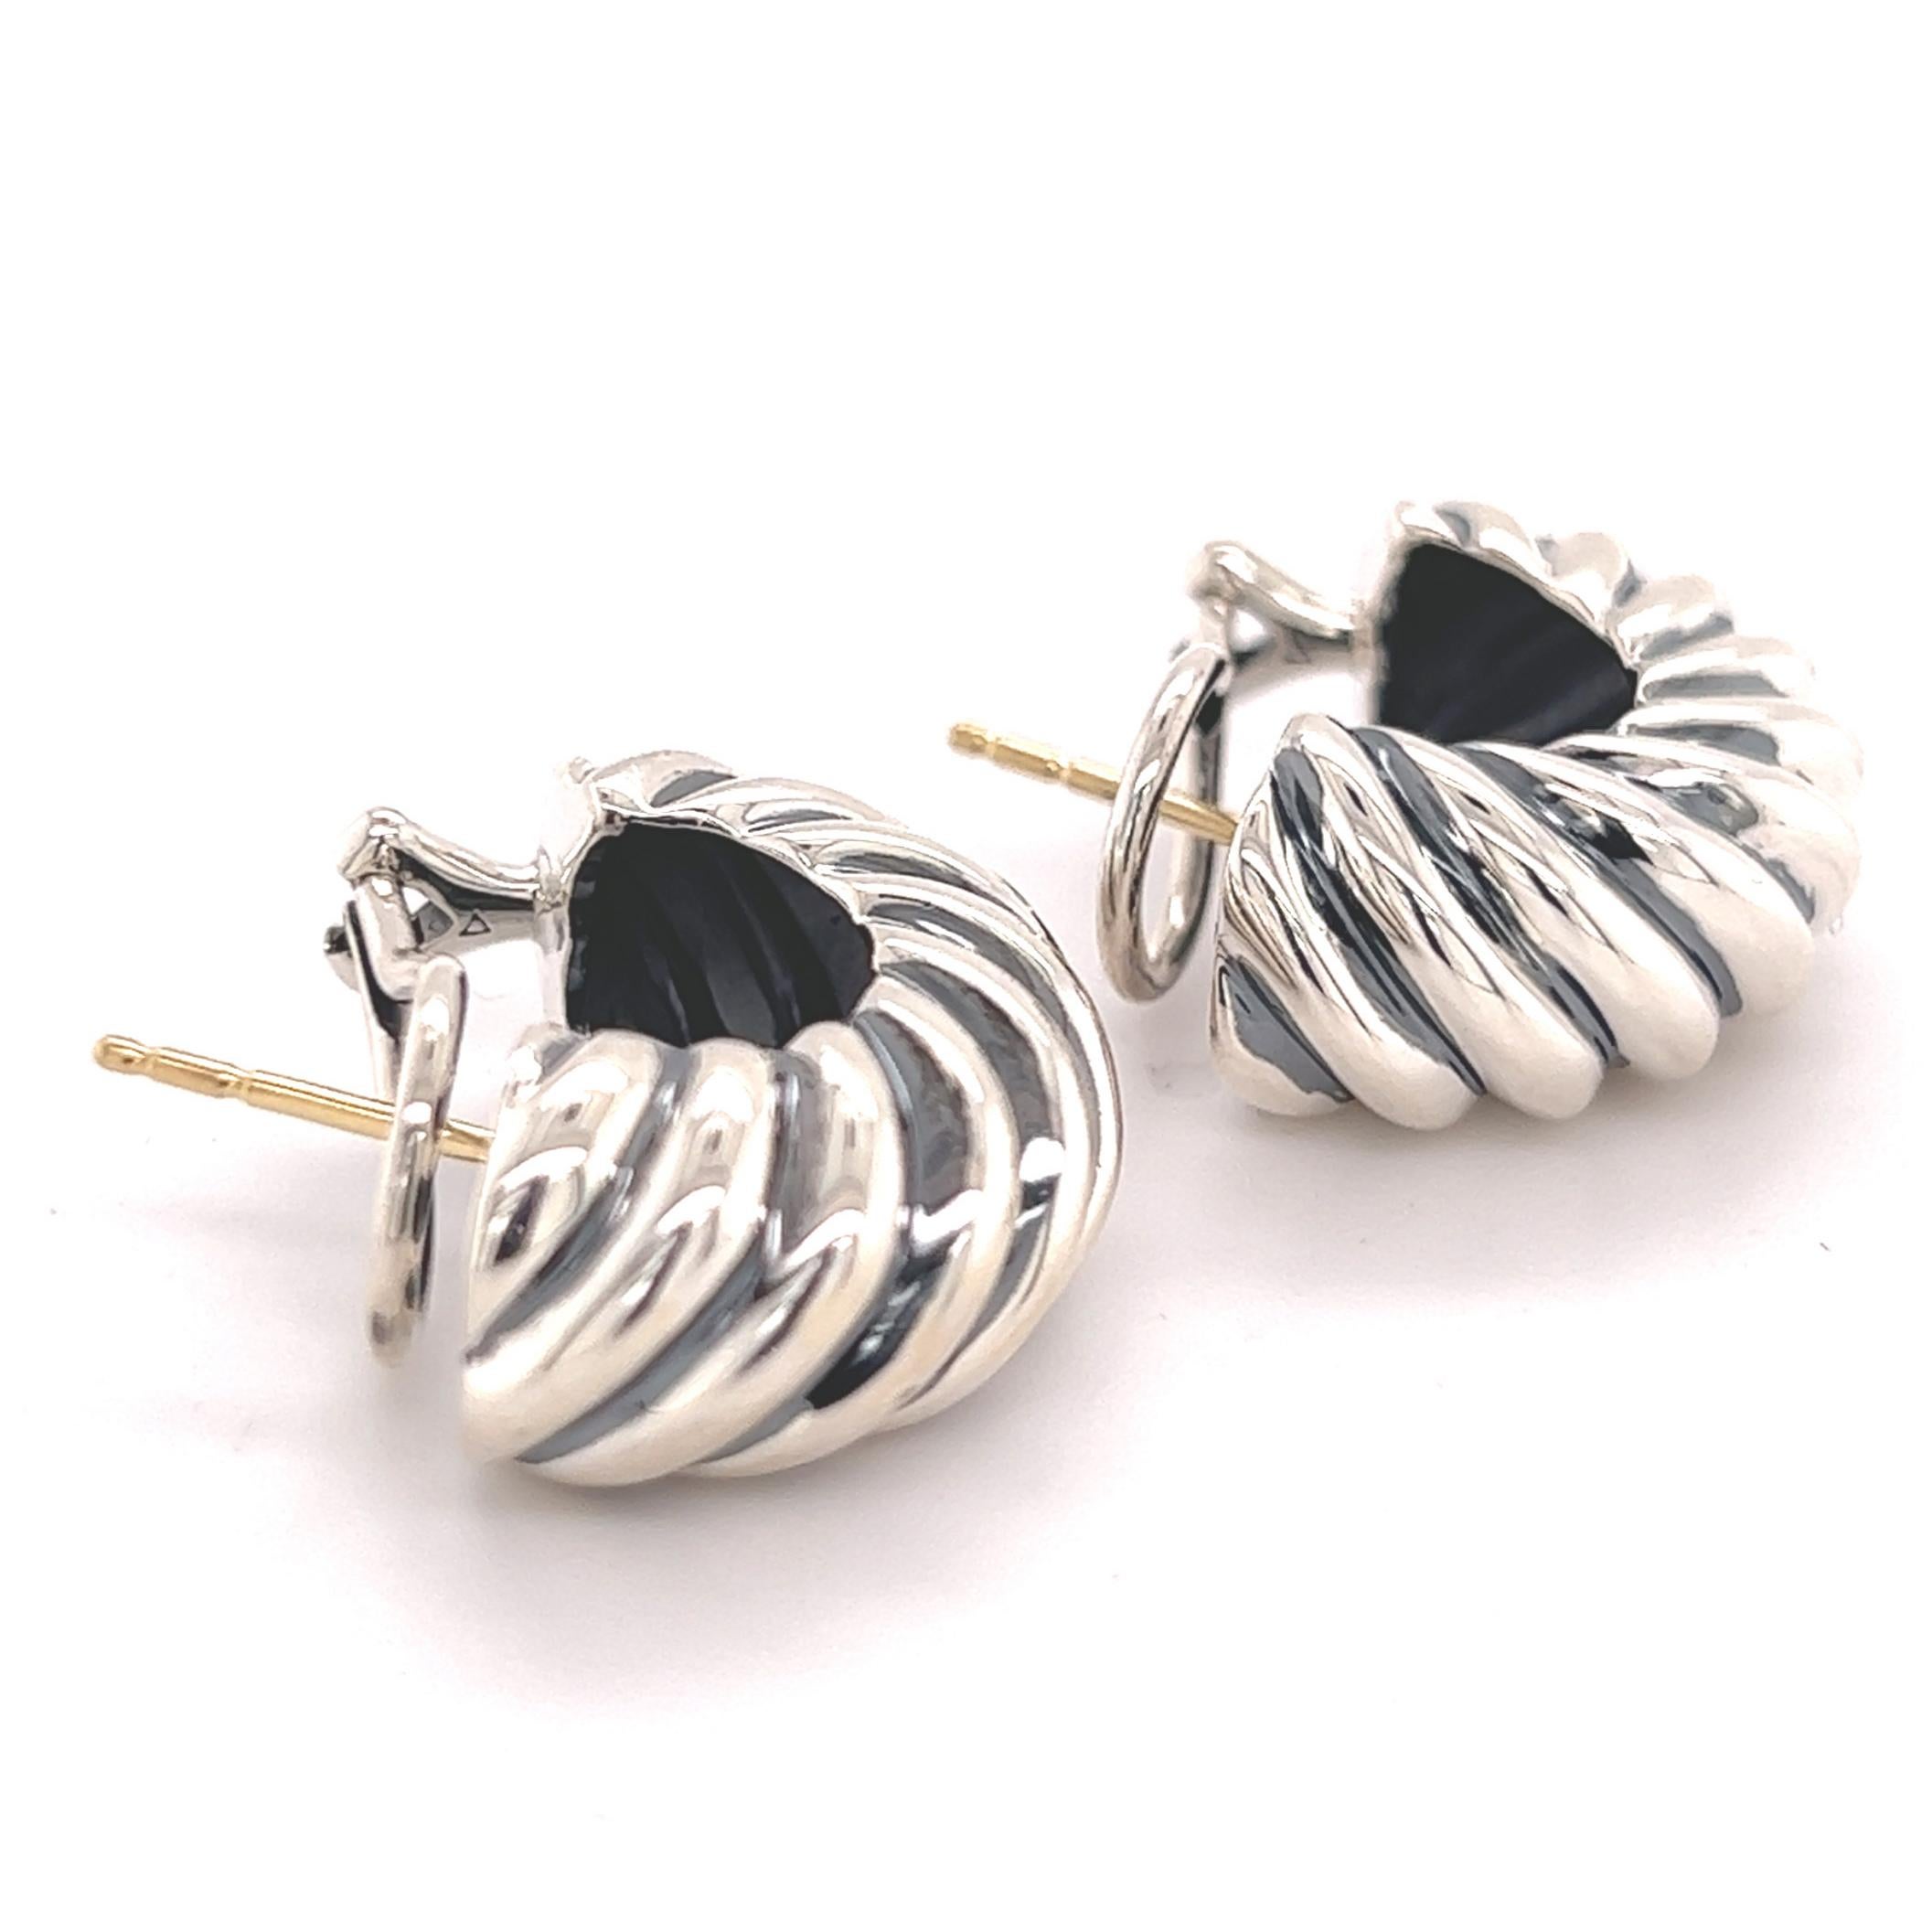 David Yurman Estate Shrimp Earrings with Omega Backs Sterling Silver DY80

These elegant Authentic David Yurman Shrimp earrings have a weight of 12.3 Grams.

TRUSTED SELLER SINCE 2002
PLEASE SEE OUR HUNDREDS OF POSITIVE FEEDBACKS FROM OUR